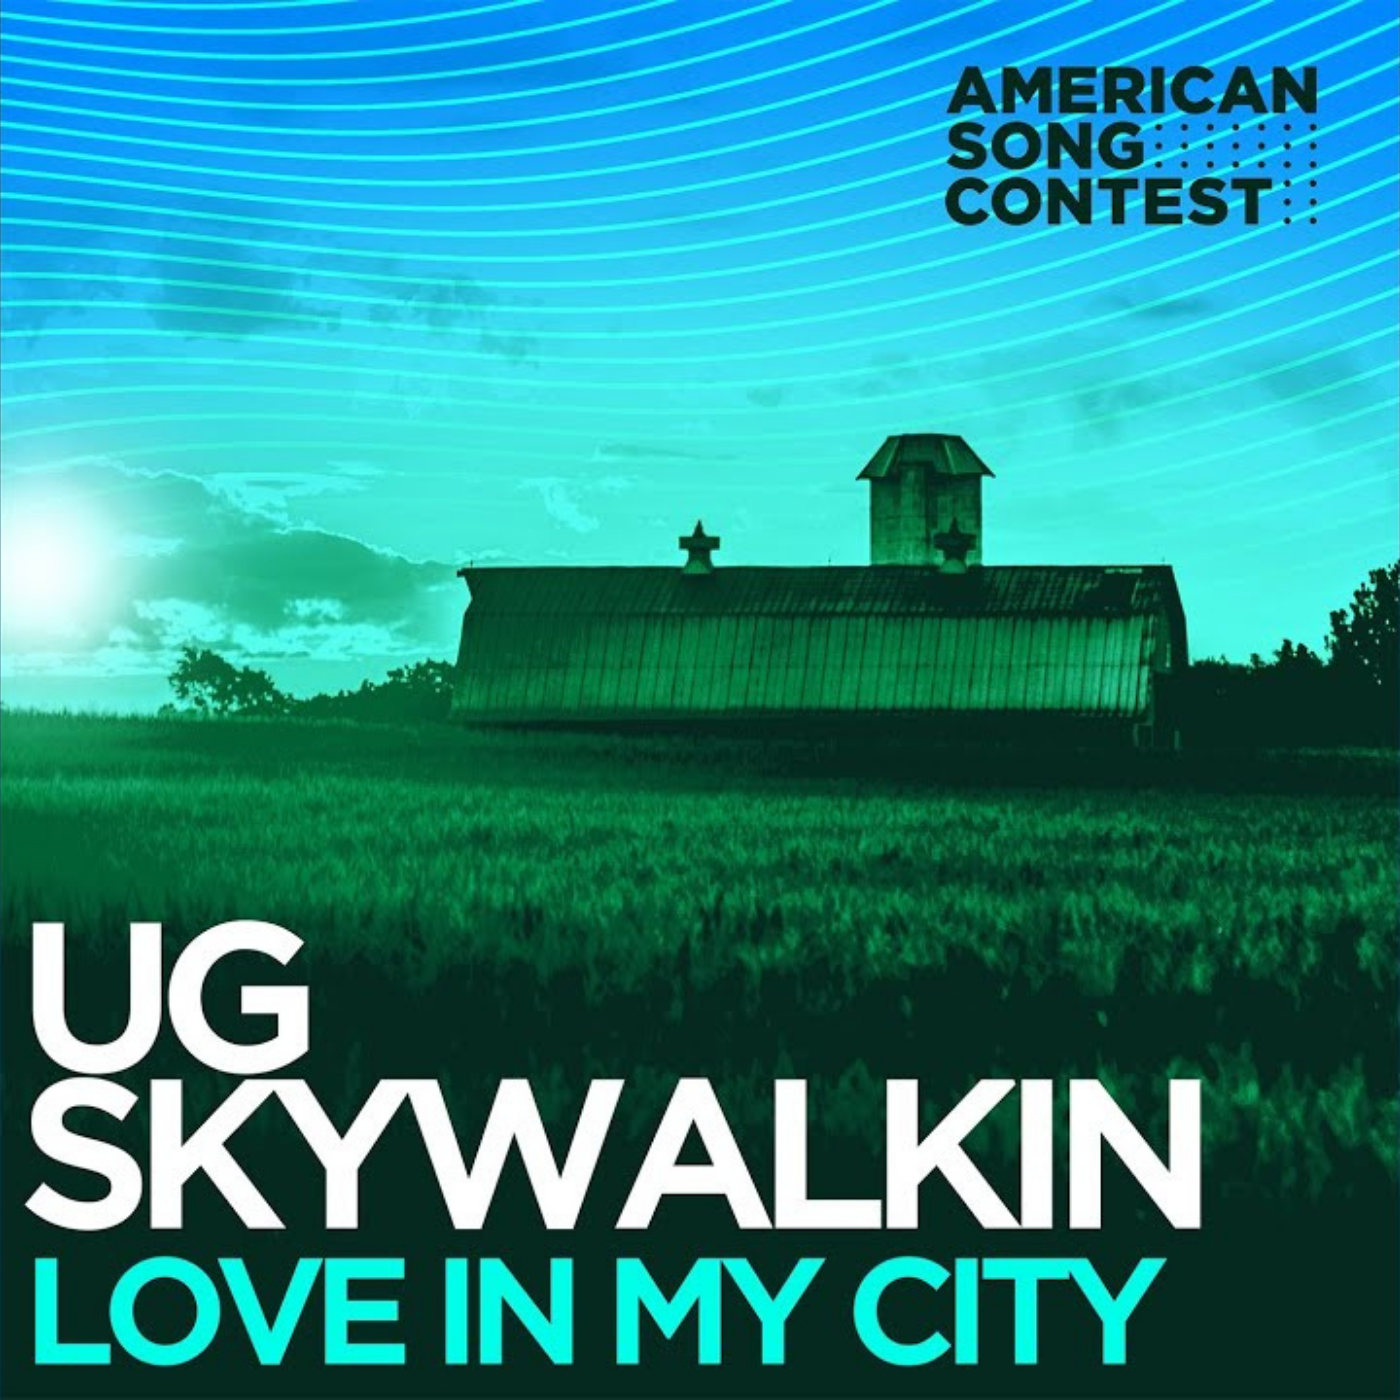 UG skywalkin ft. featuring Maxie Love In My City cover artwork